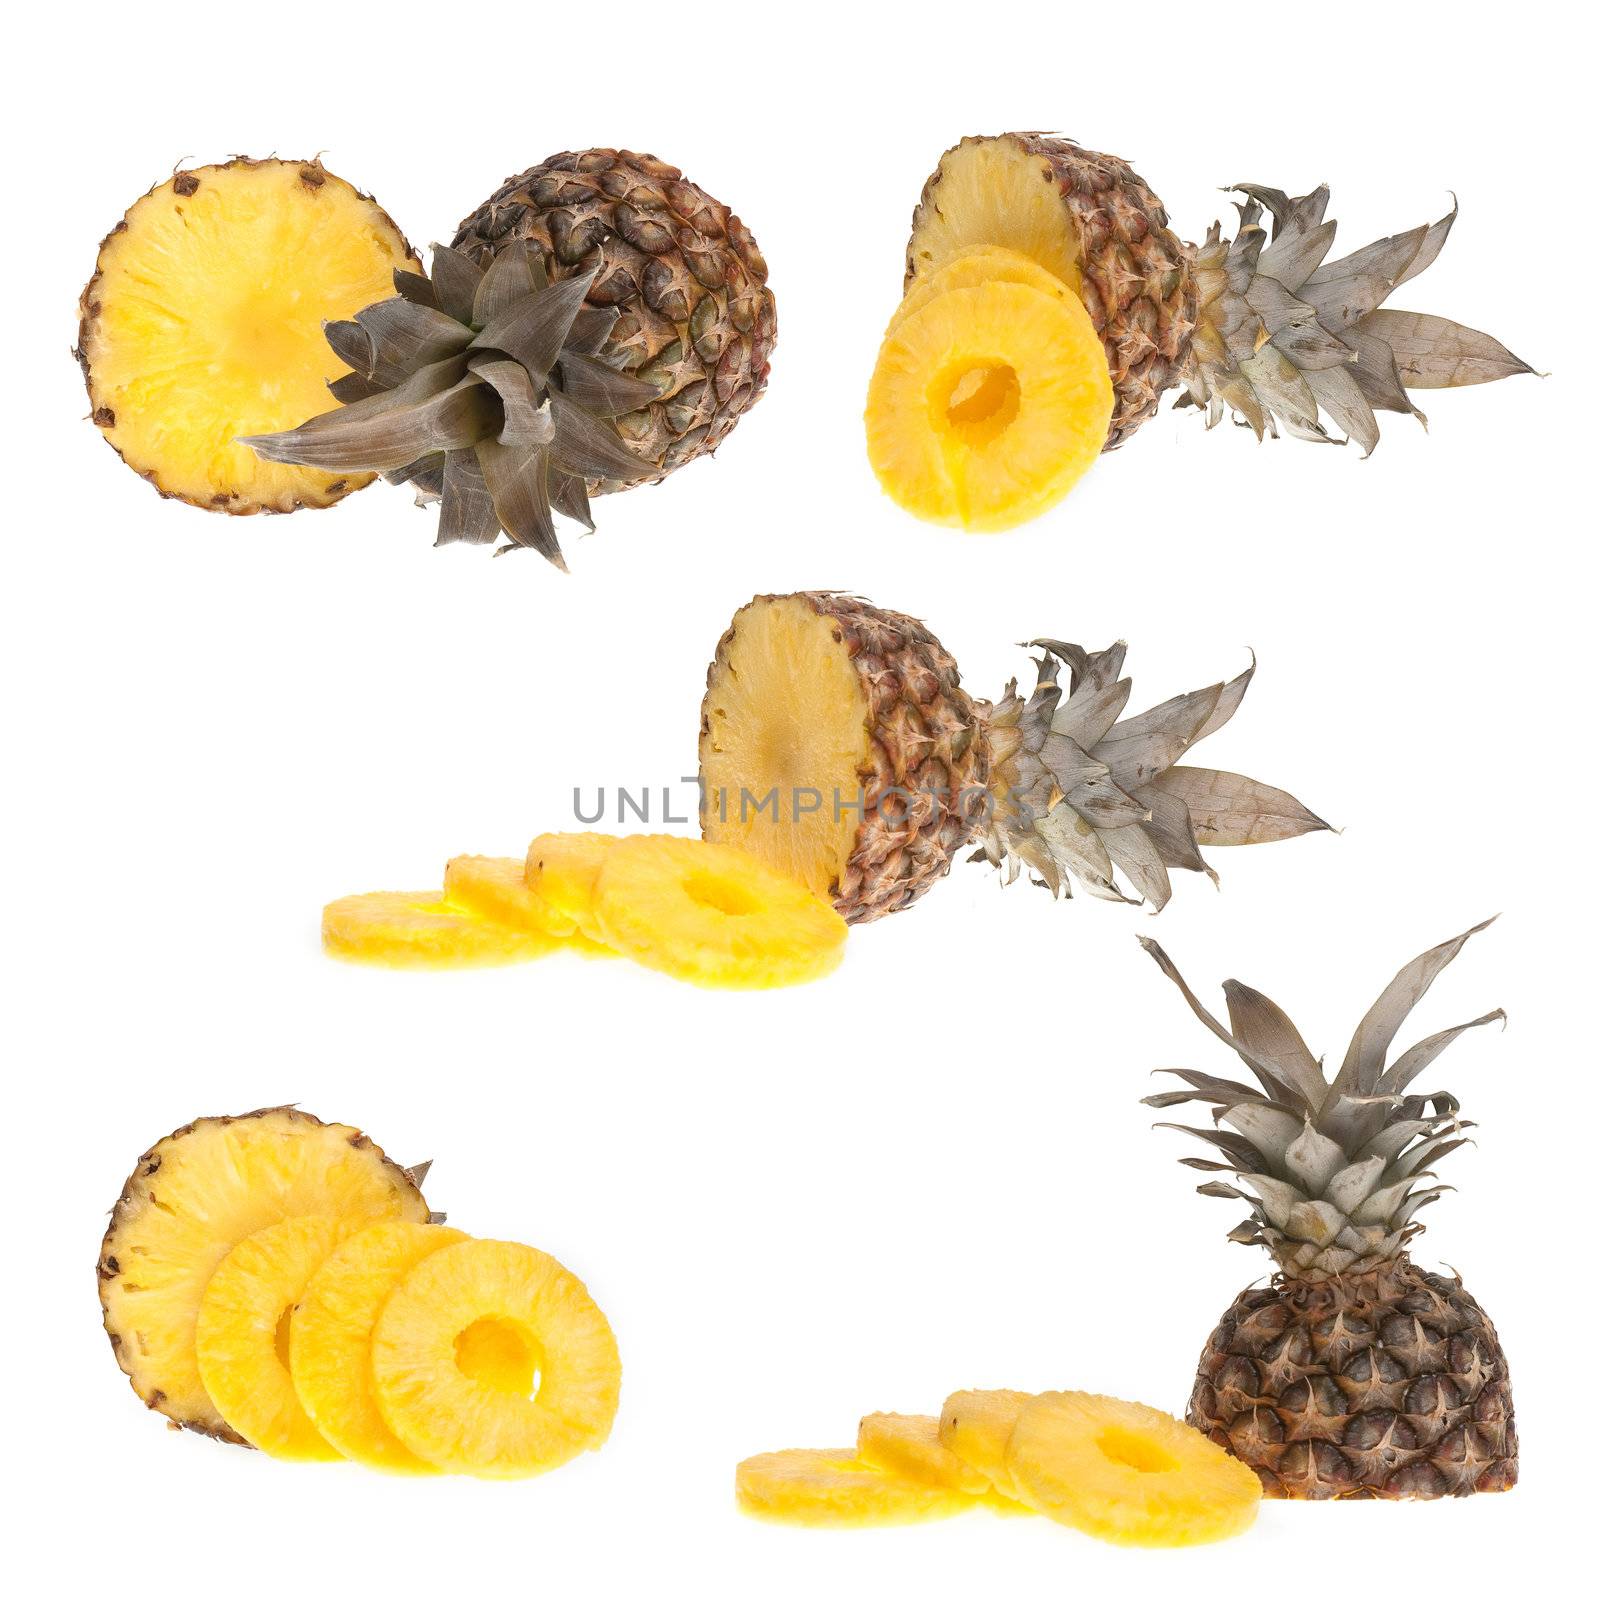 Whole and half pinapple by homydesign